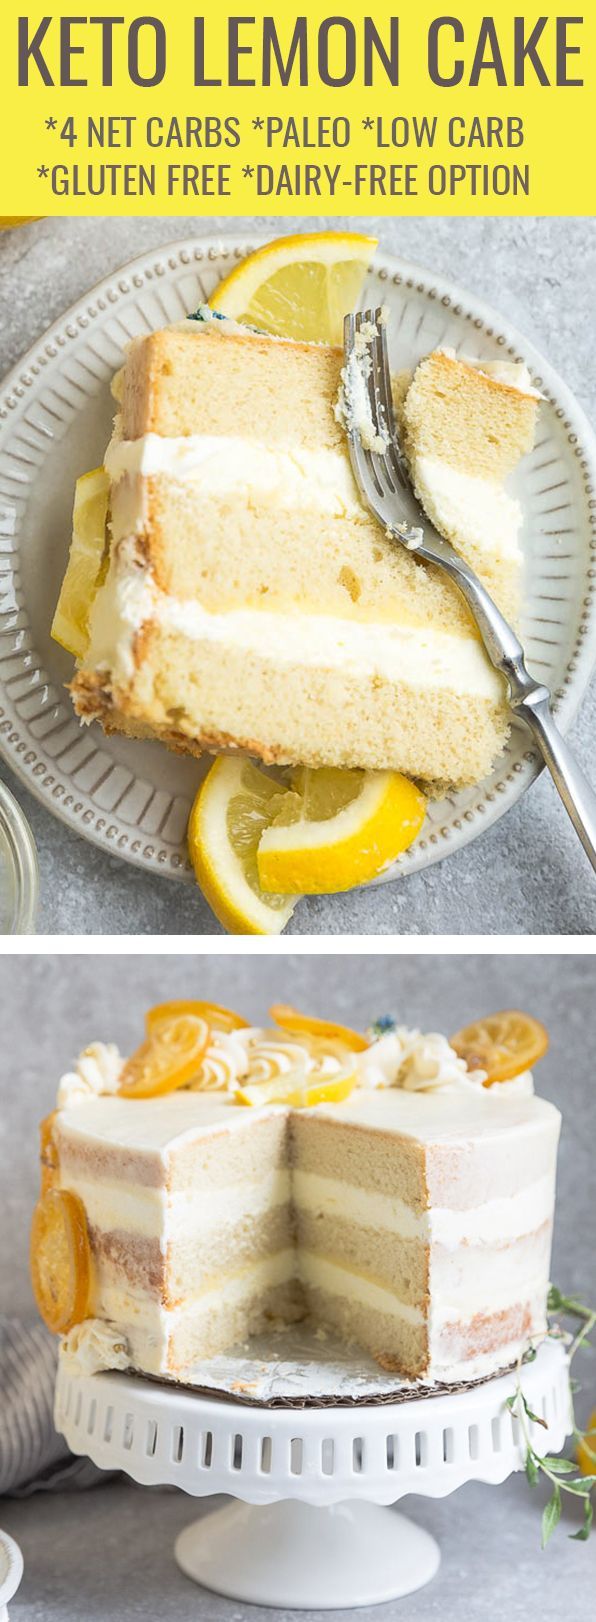 12 desserts For Parties cake ideas